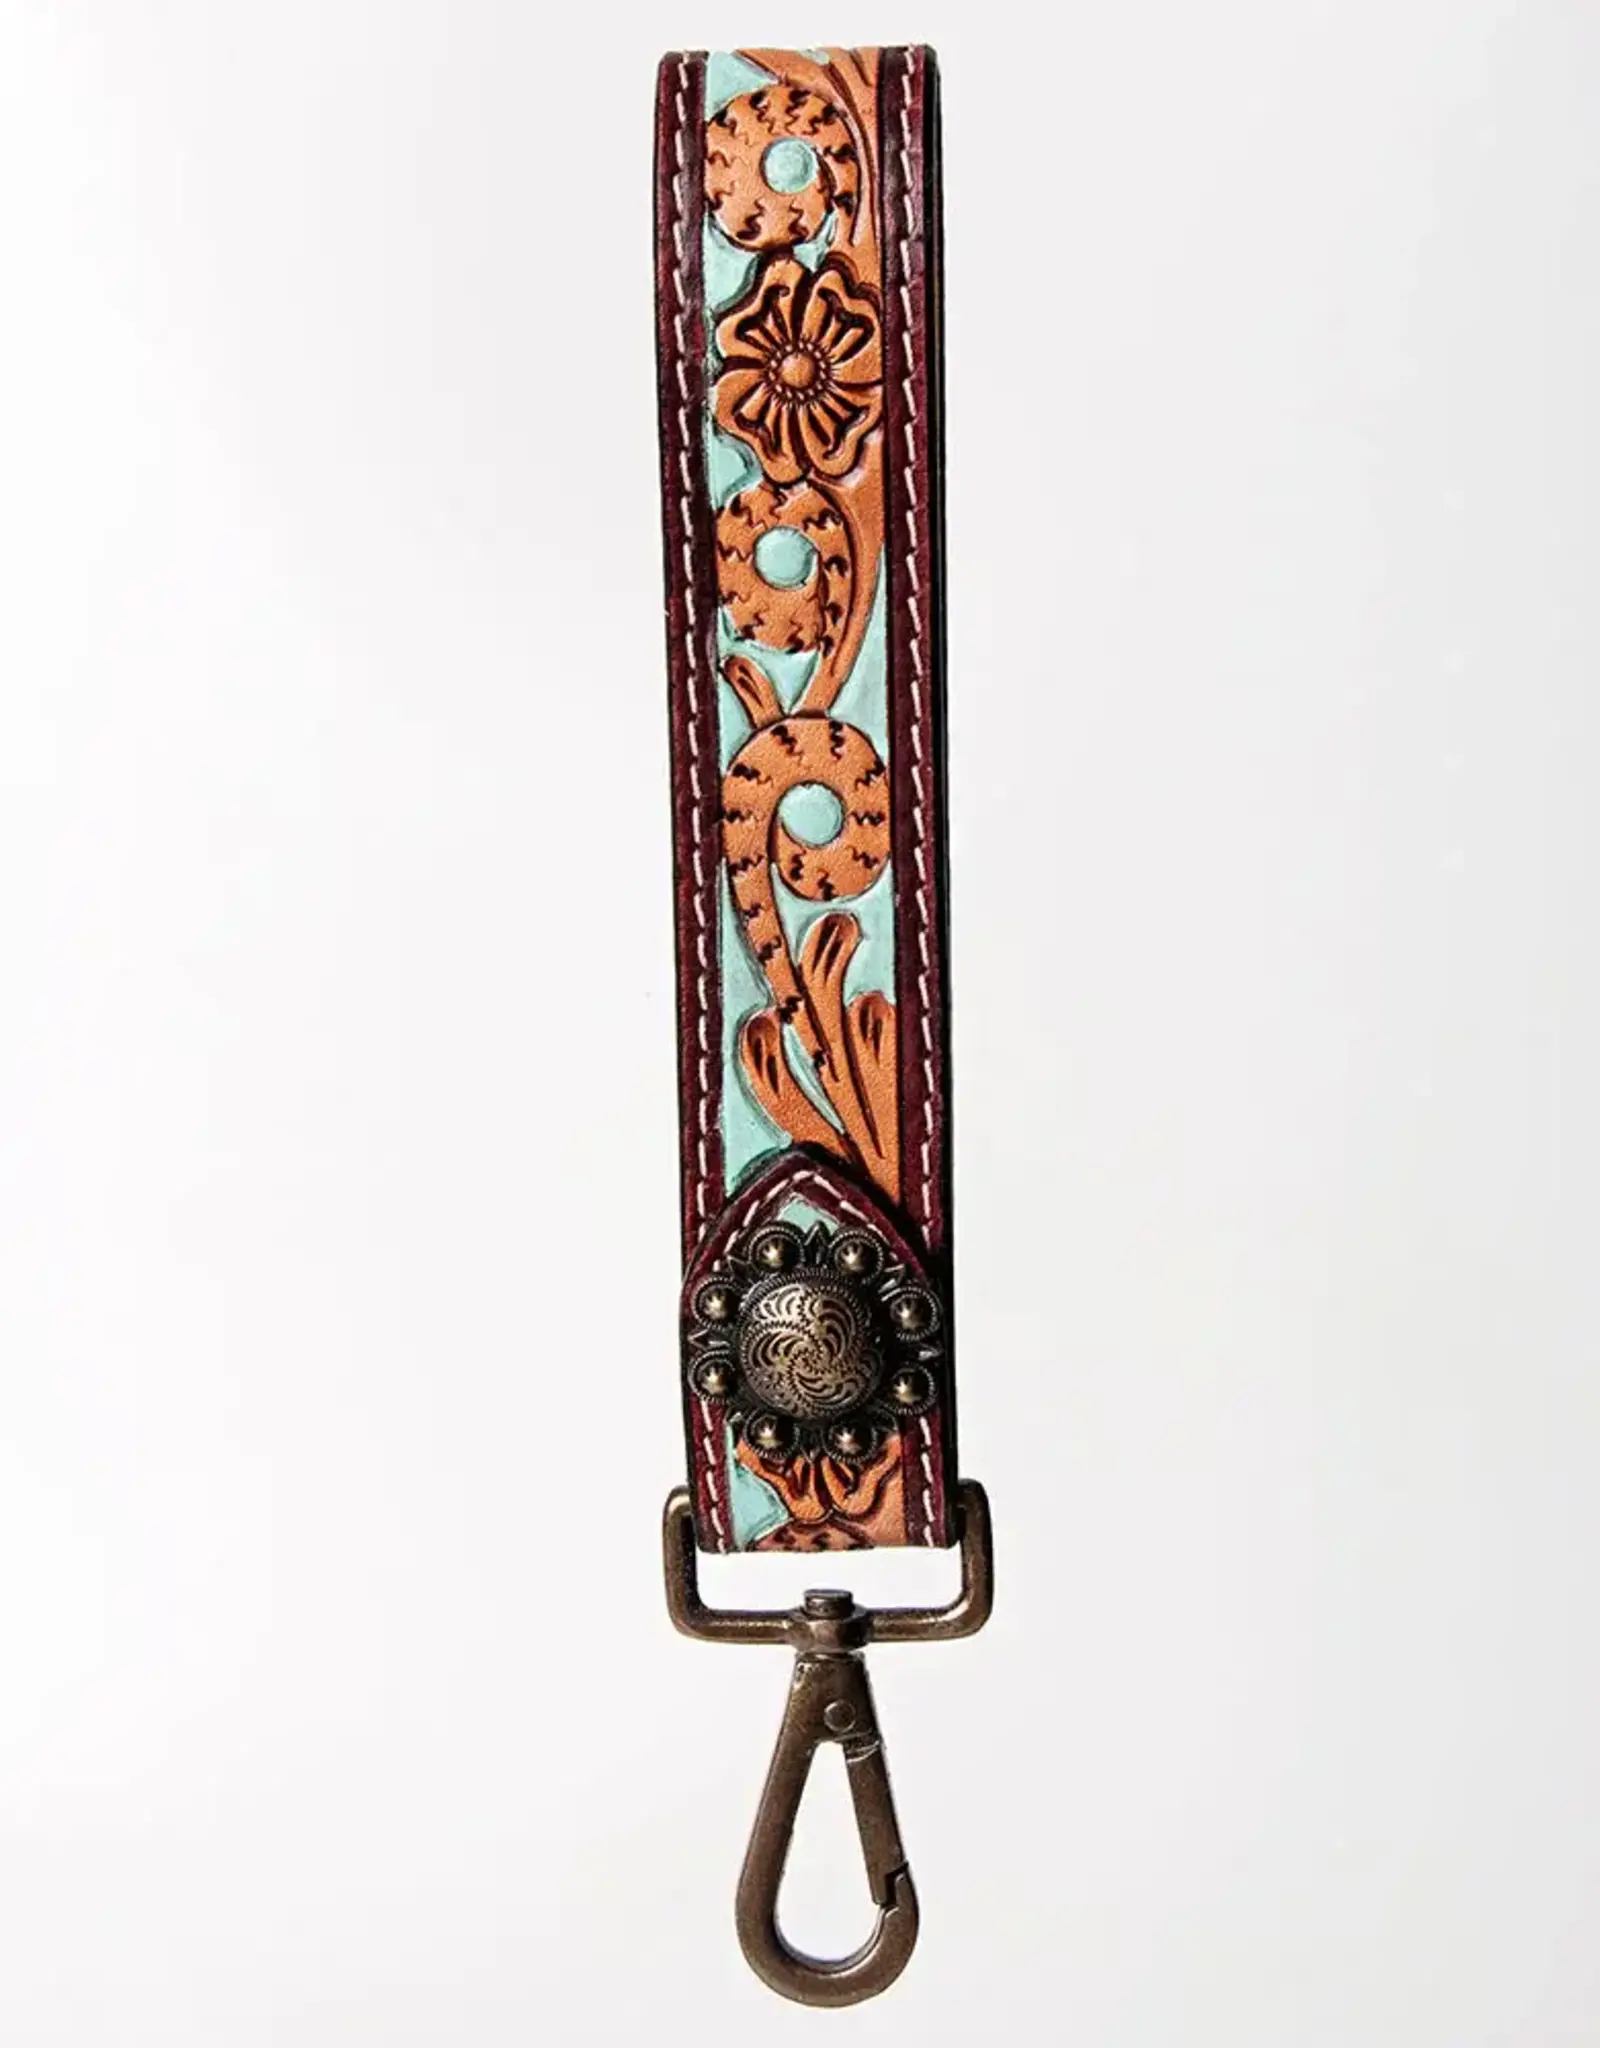 American Darling American Darling Tooled Painted Turquoise Floral Purse Clutch Lanyard Handle